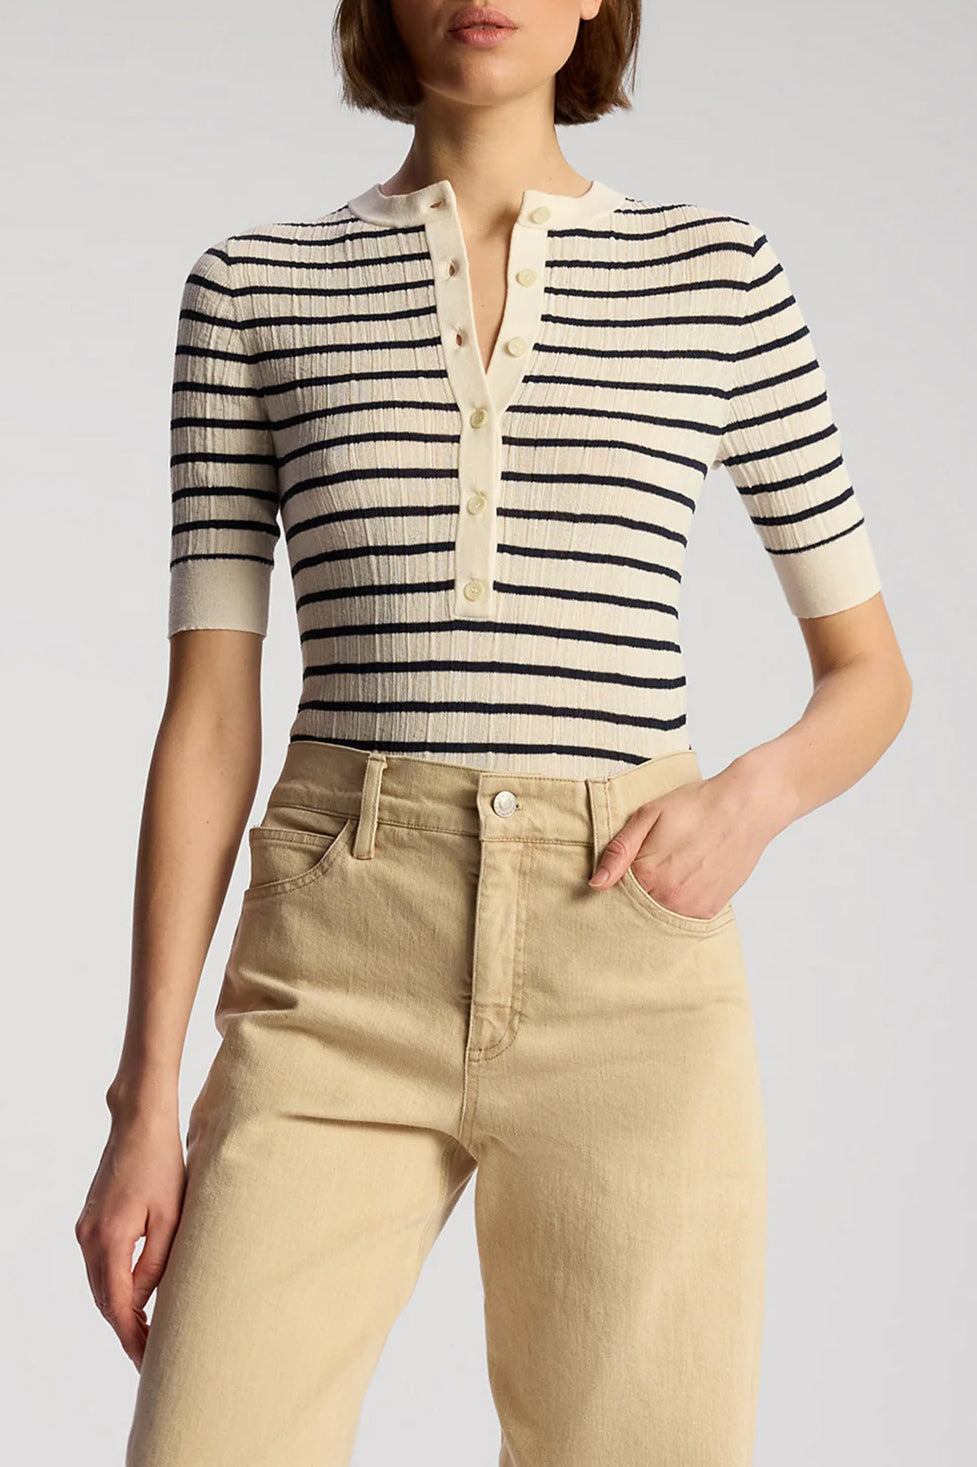 Top Fisher a righe bianche/navy